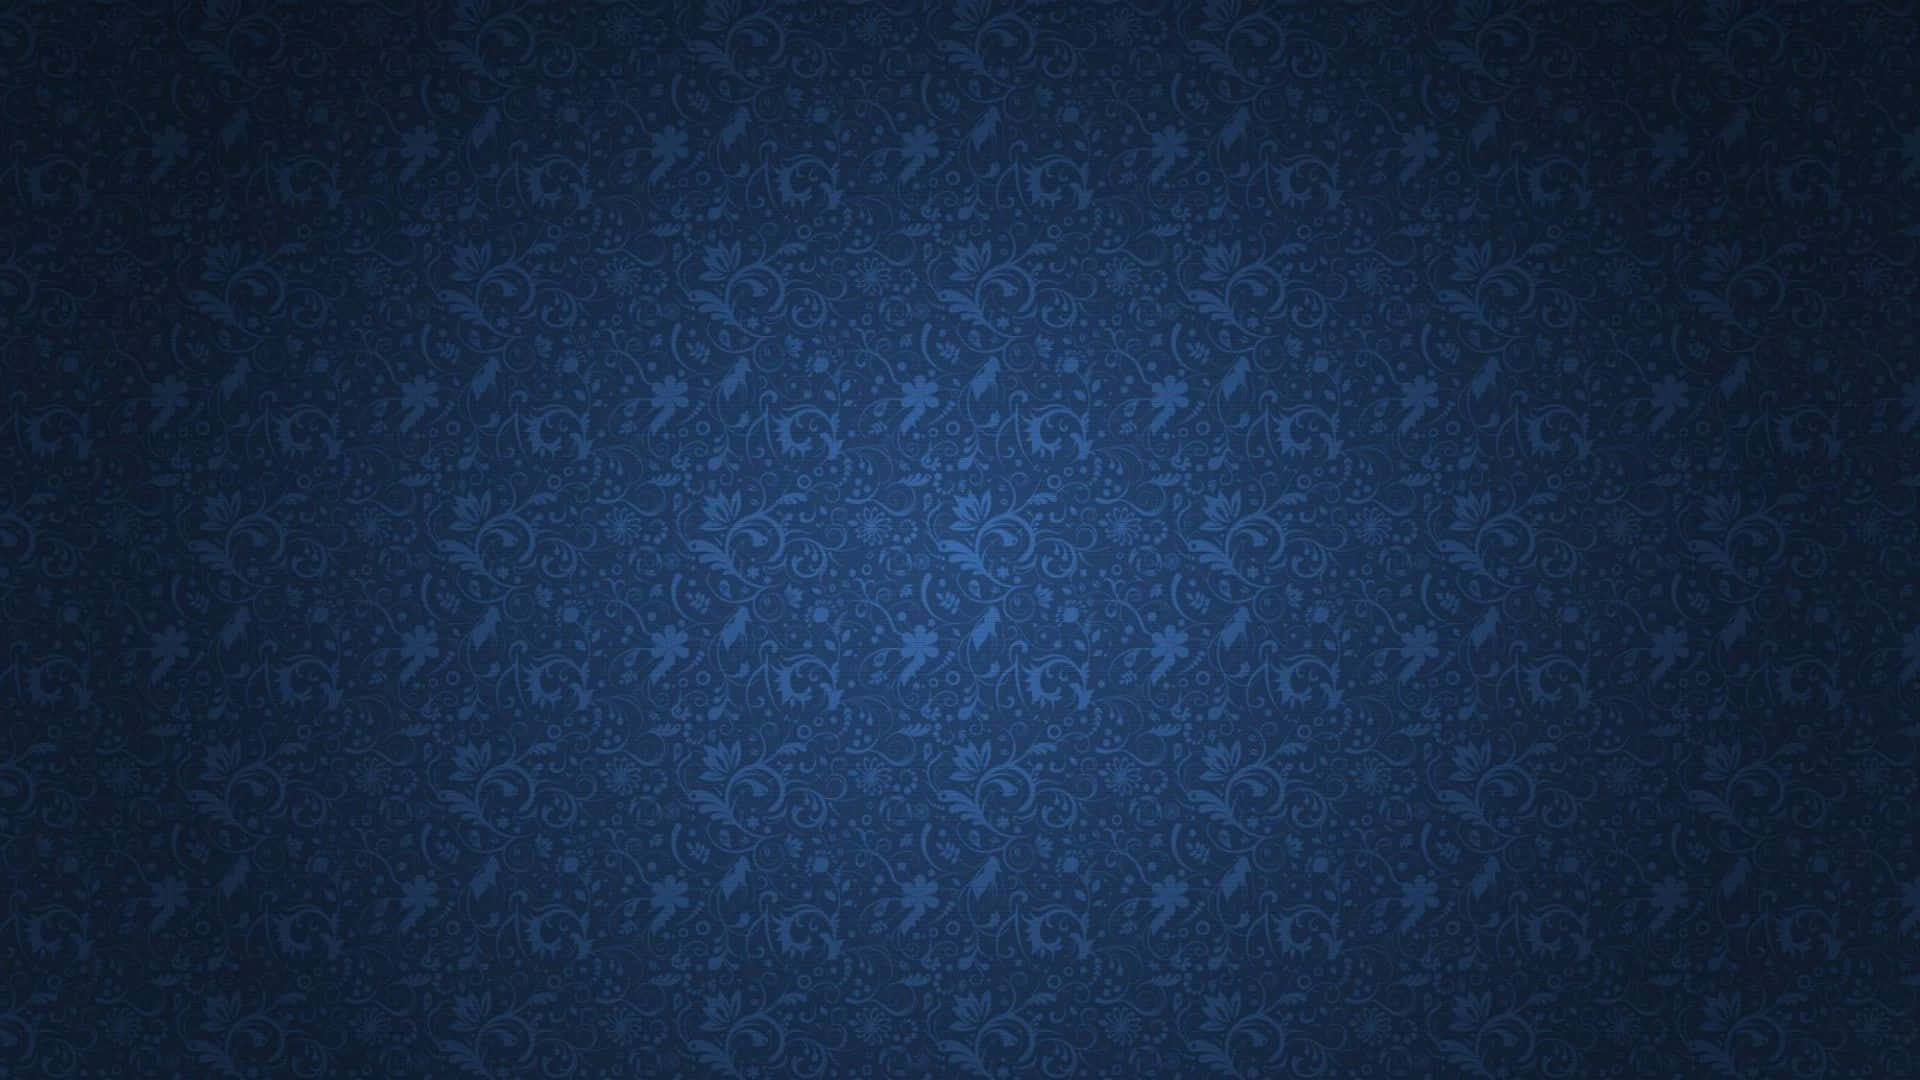 A Blue Wallpaper With A Floral Pattern